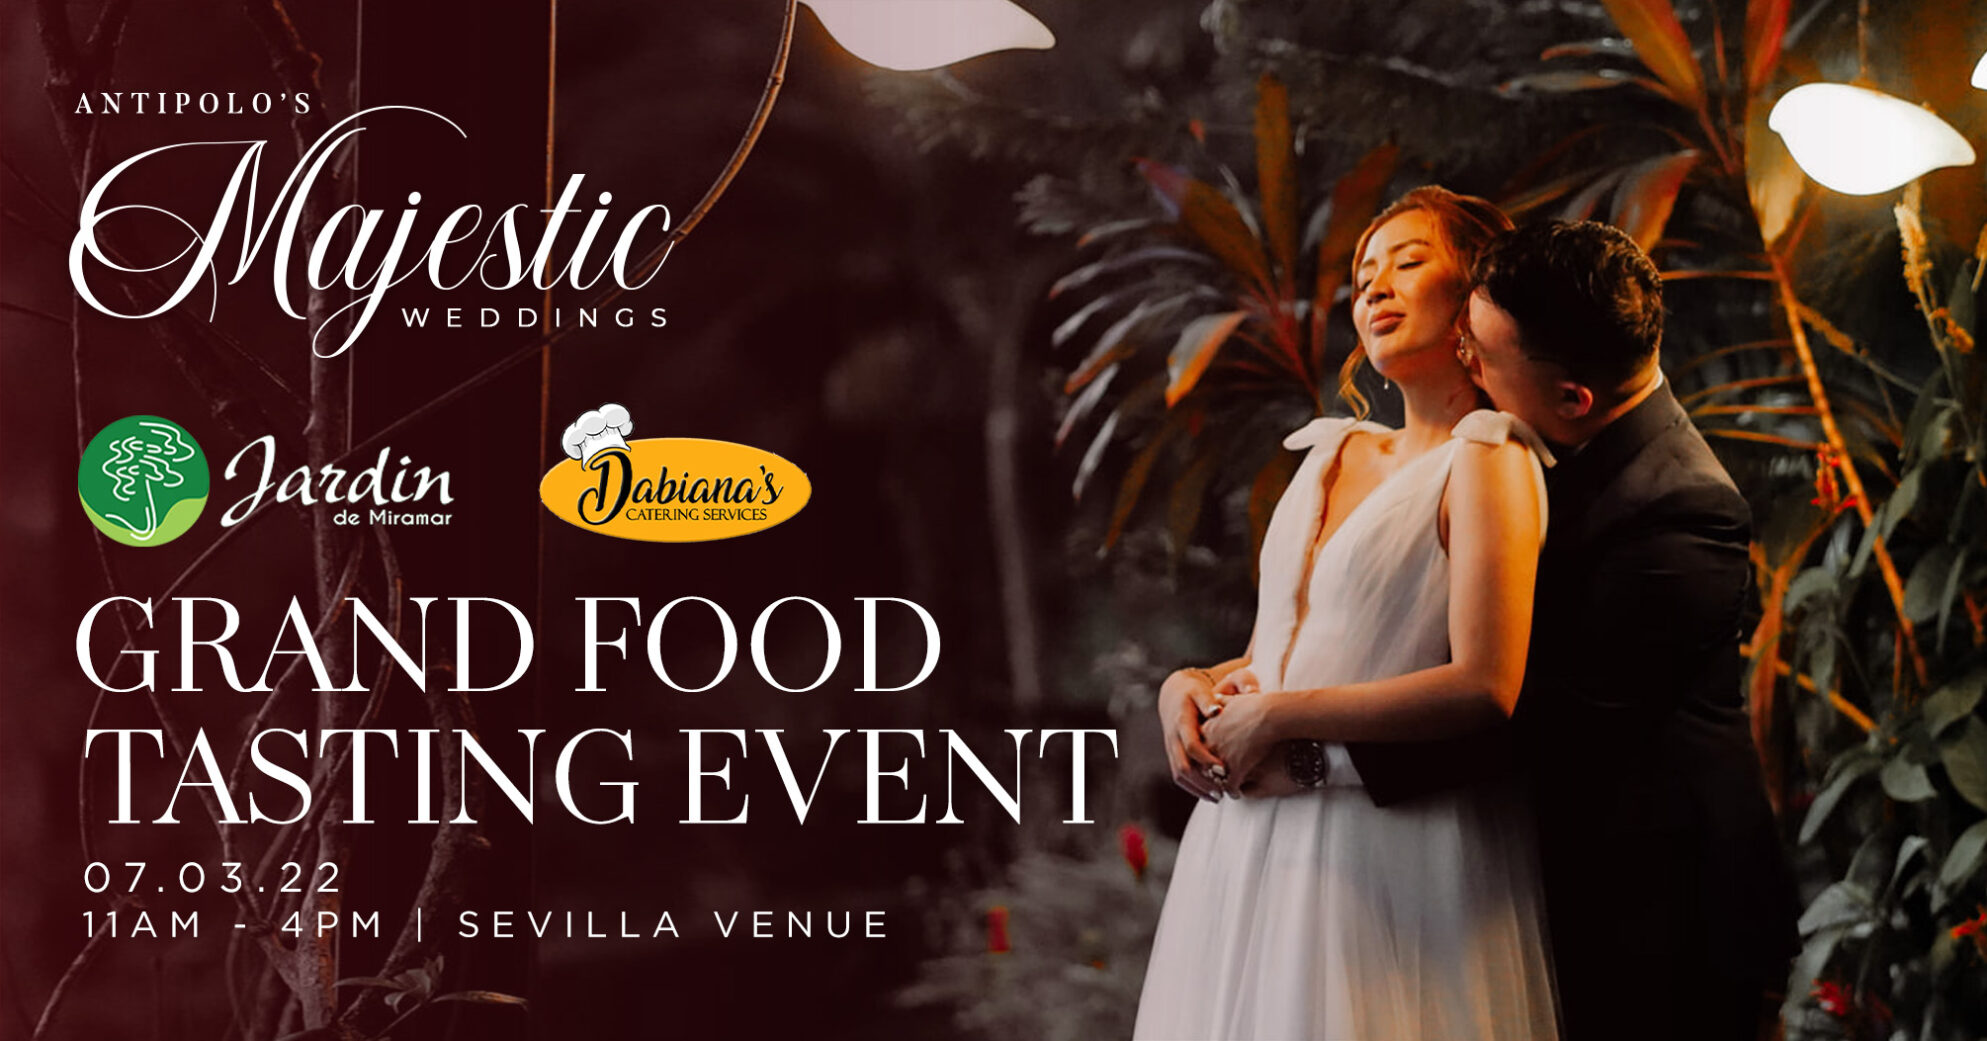 Dabianas Catering's Grand Food Tasting Event